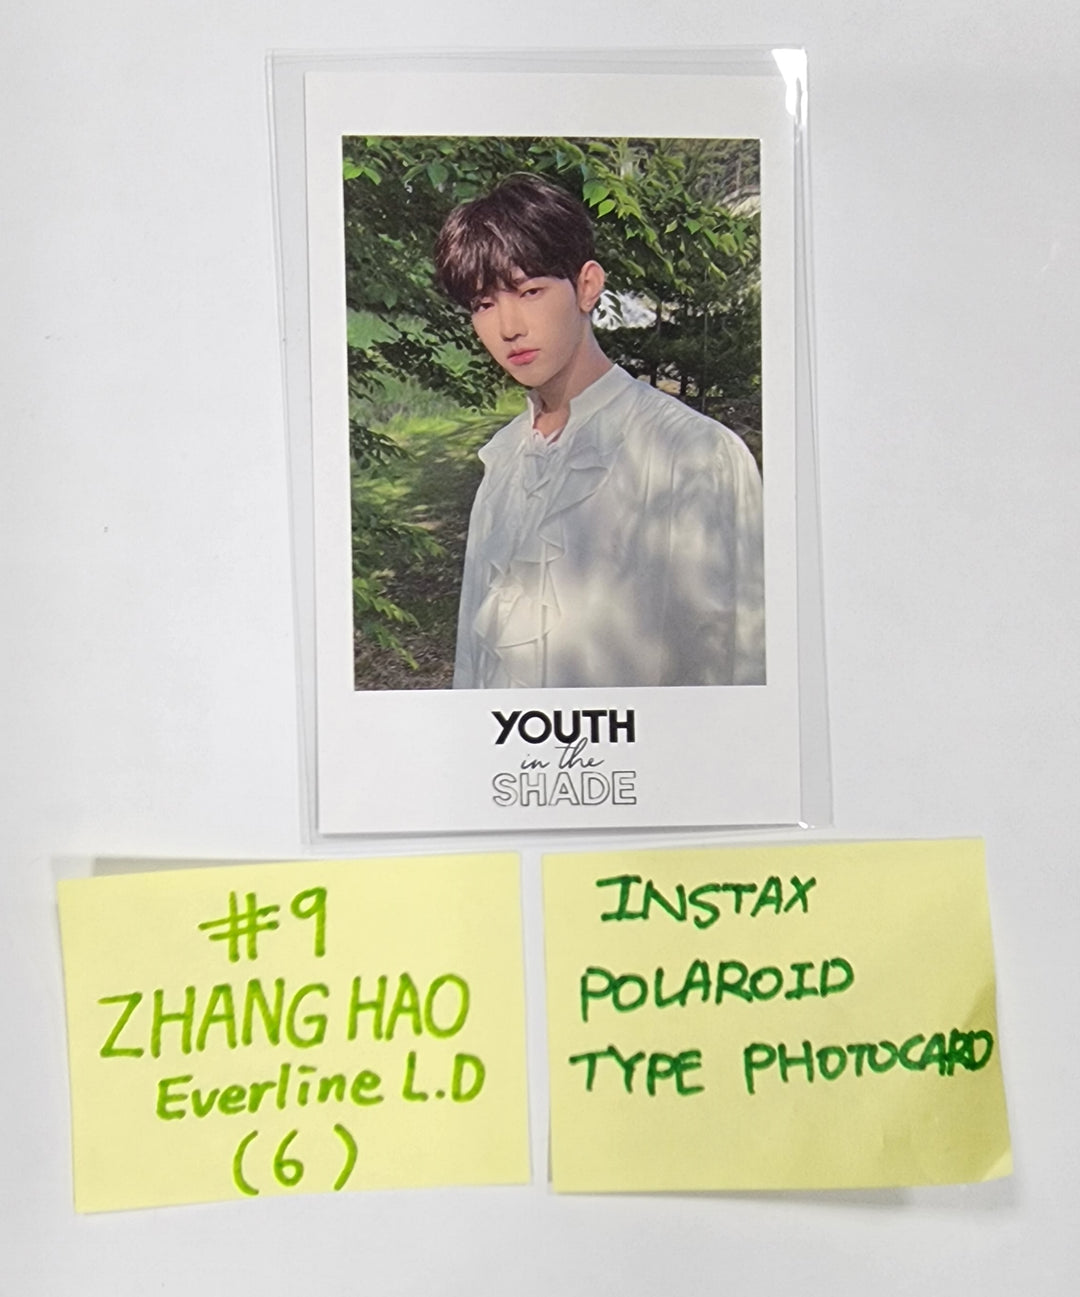 ZEROBASEONE "YOUTH IN THE SHADE" - Everline Lucky Draw Event Photocard, Polaroid Type Photocard